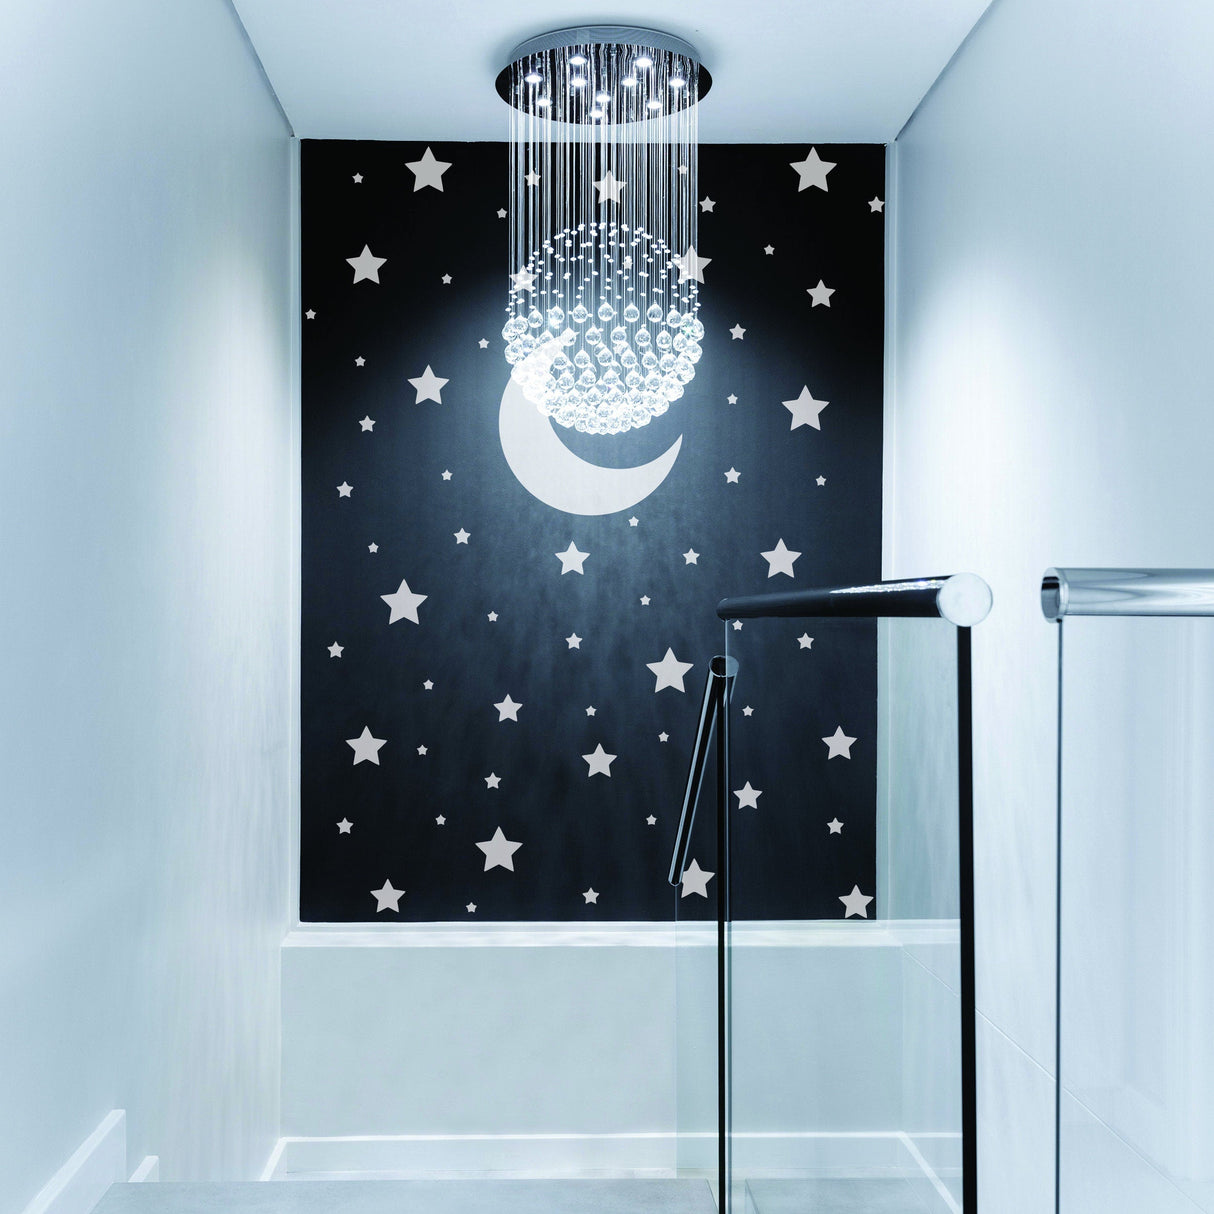 White Stars and Moon Wall Stickers for Kids Room | Nursery Night Sky Crescent Decal Set